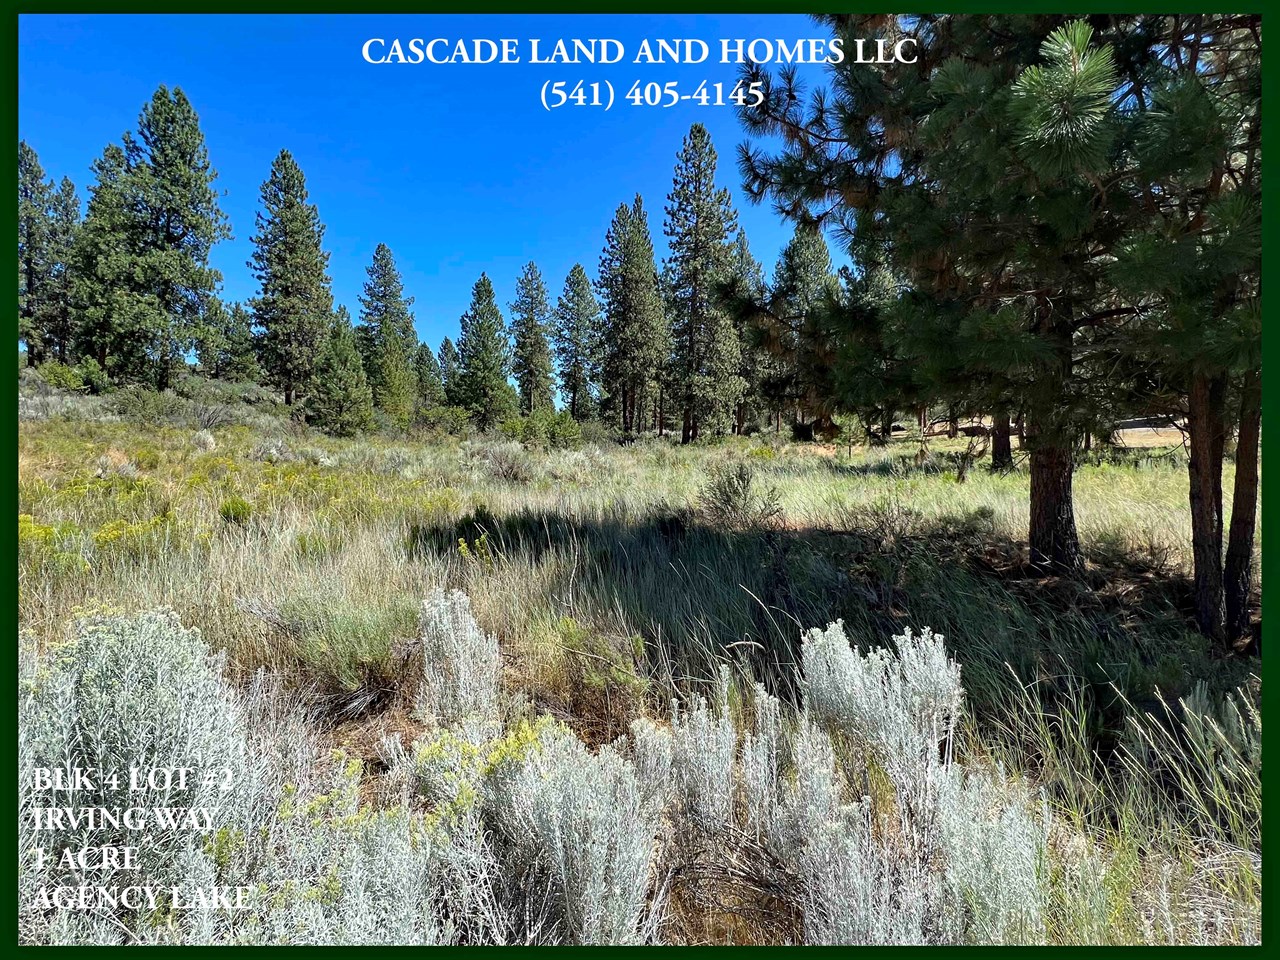 unlike many properties in the area, this gorgeous parcel has many large pine trees adding natural beauty, shade in the summer and protection in the winters, they also attract  birds and wildlife! the property also has rabbit brush, sage, and native grasses. in the spring it is covered in beautiful wildflowers!